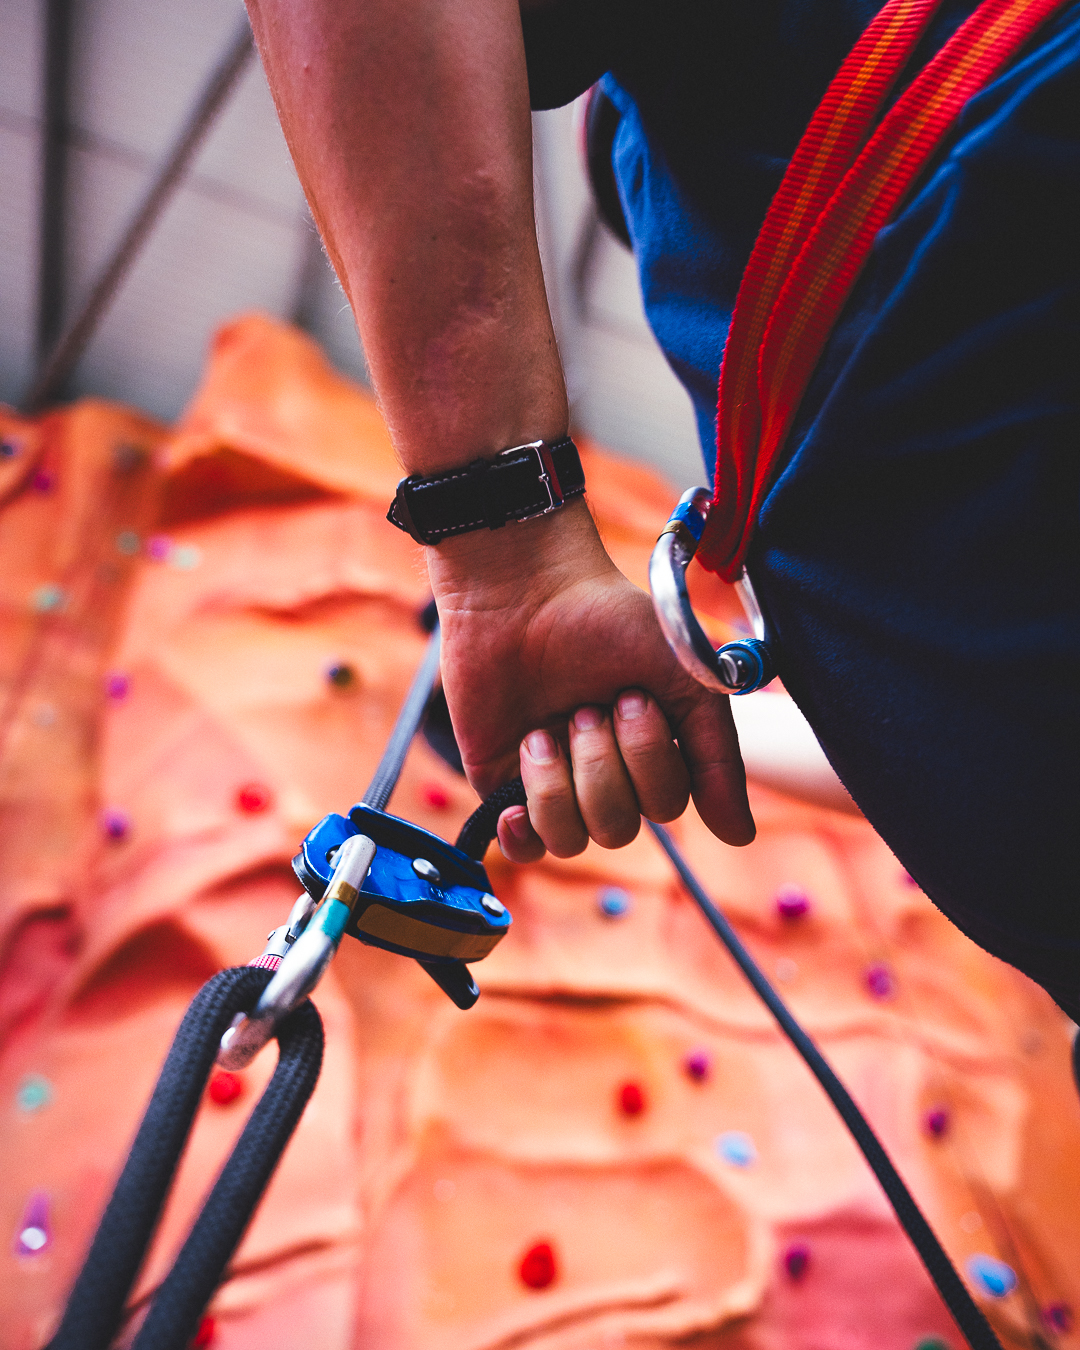 The camera is at knee-height and facing upwards, focused on a piece of climbing equipment and a person's hand and waist next to the equipment with the orange indoor climbing wall behind.